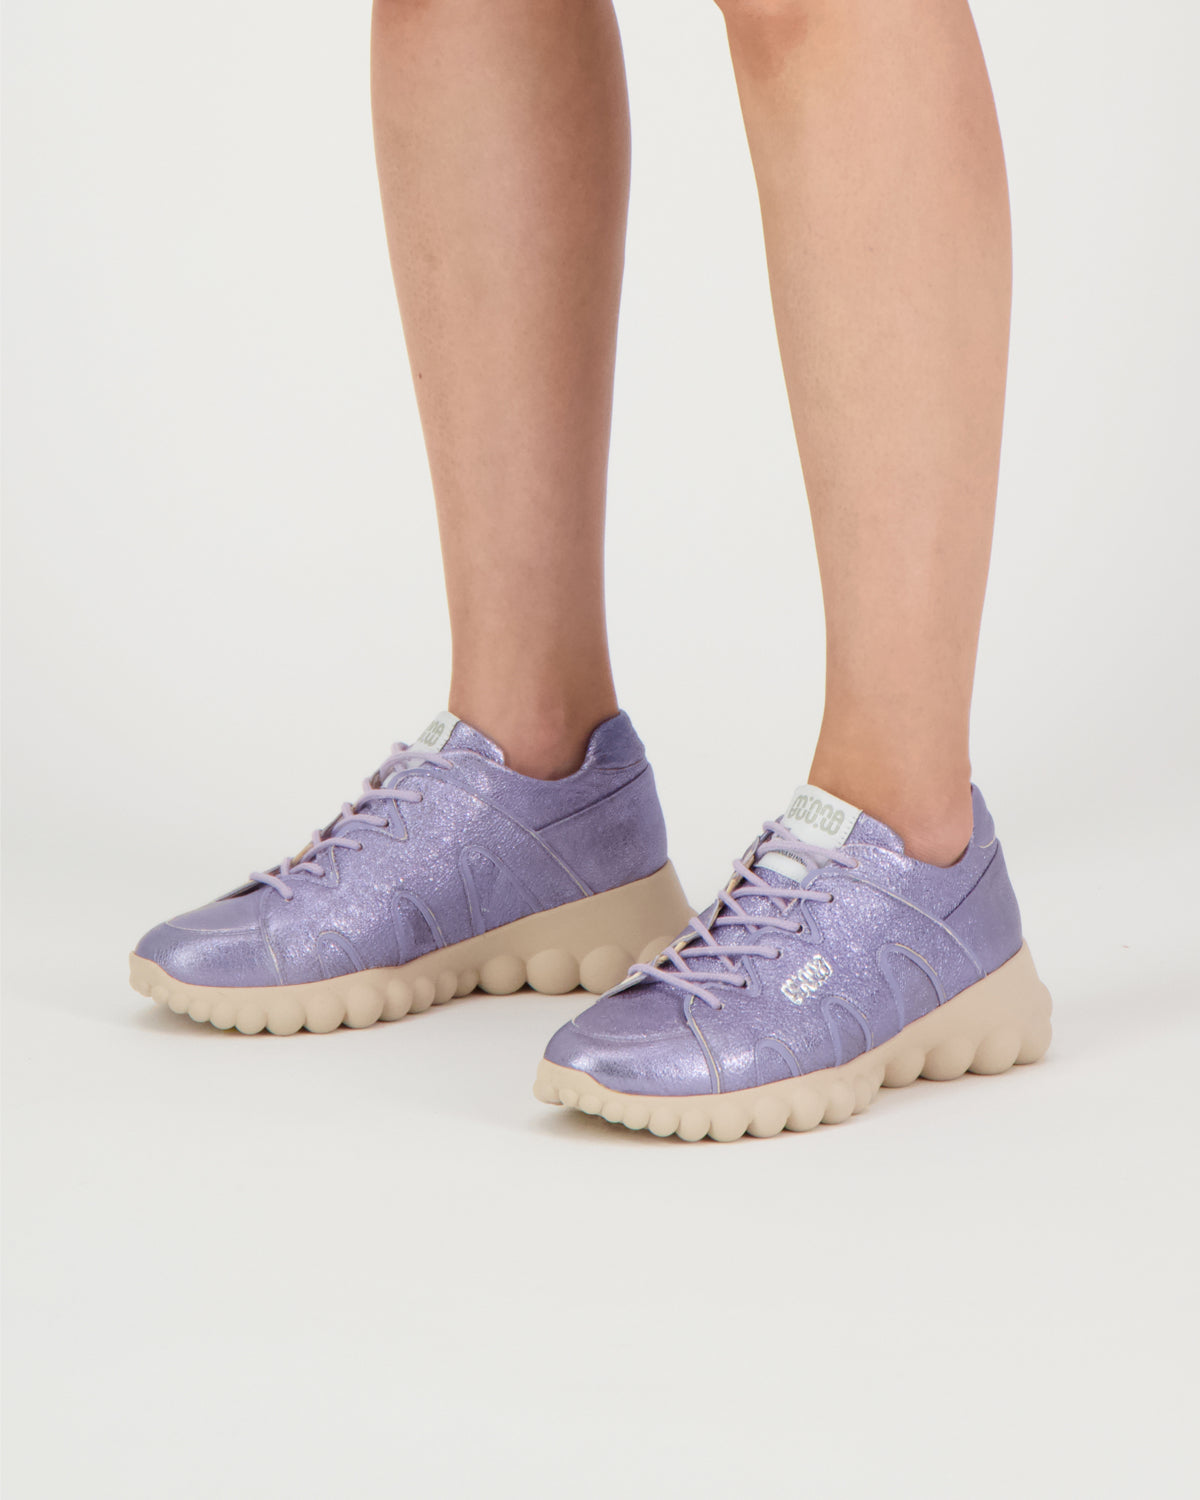 Chain Reaction Lilac Metallic Leather